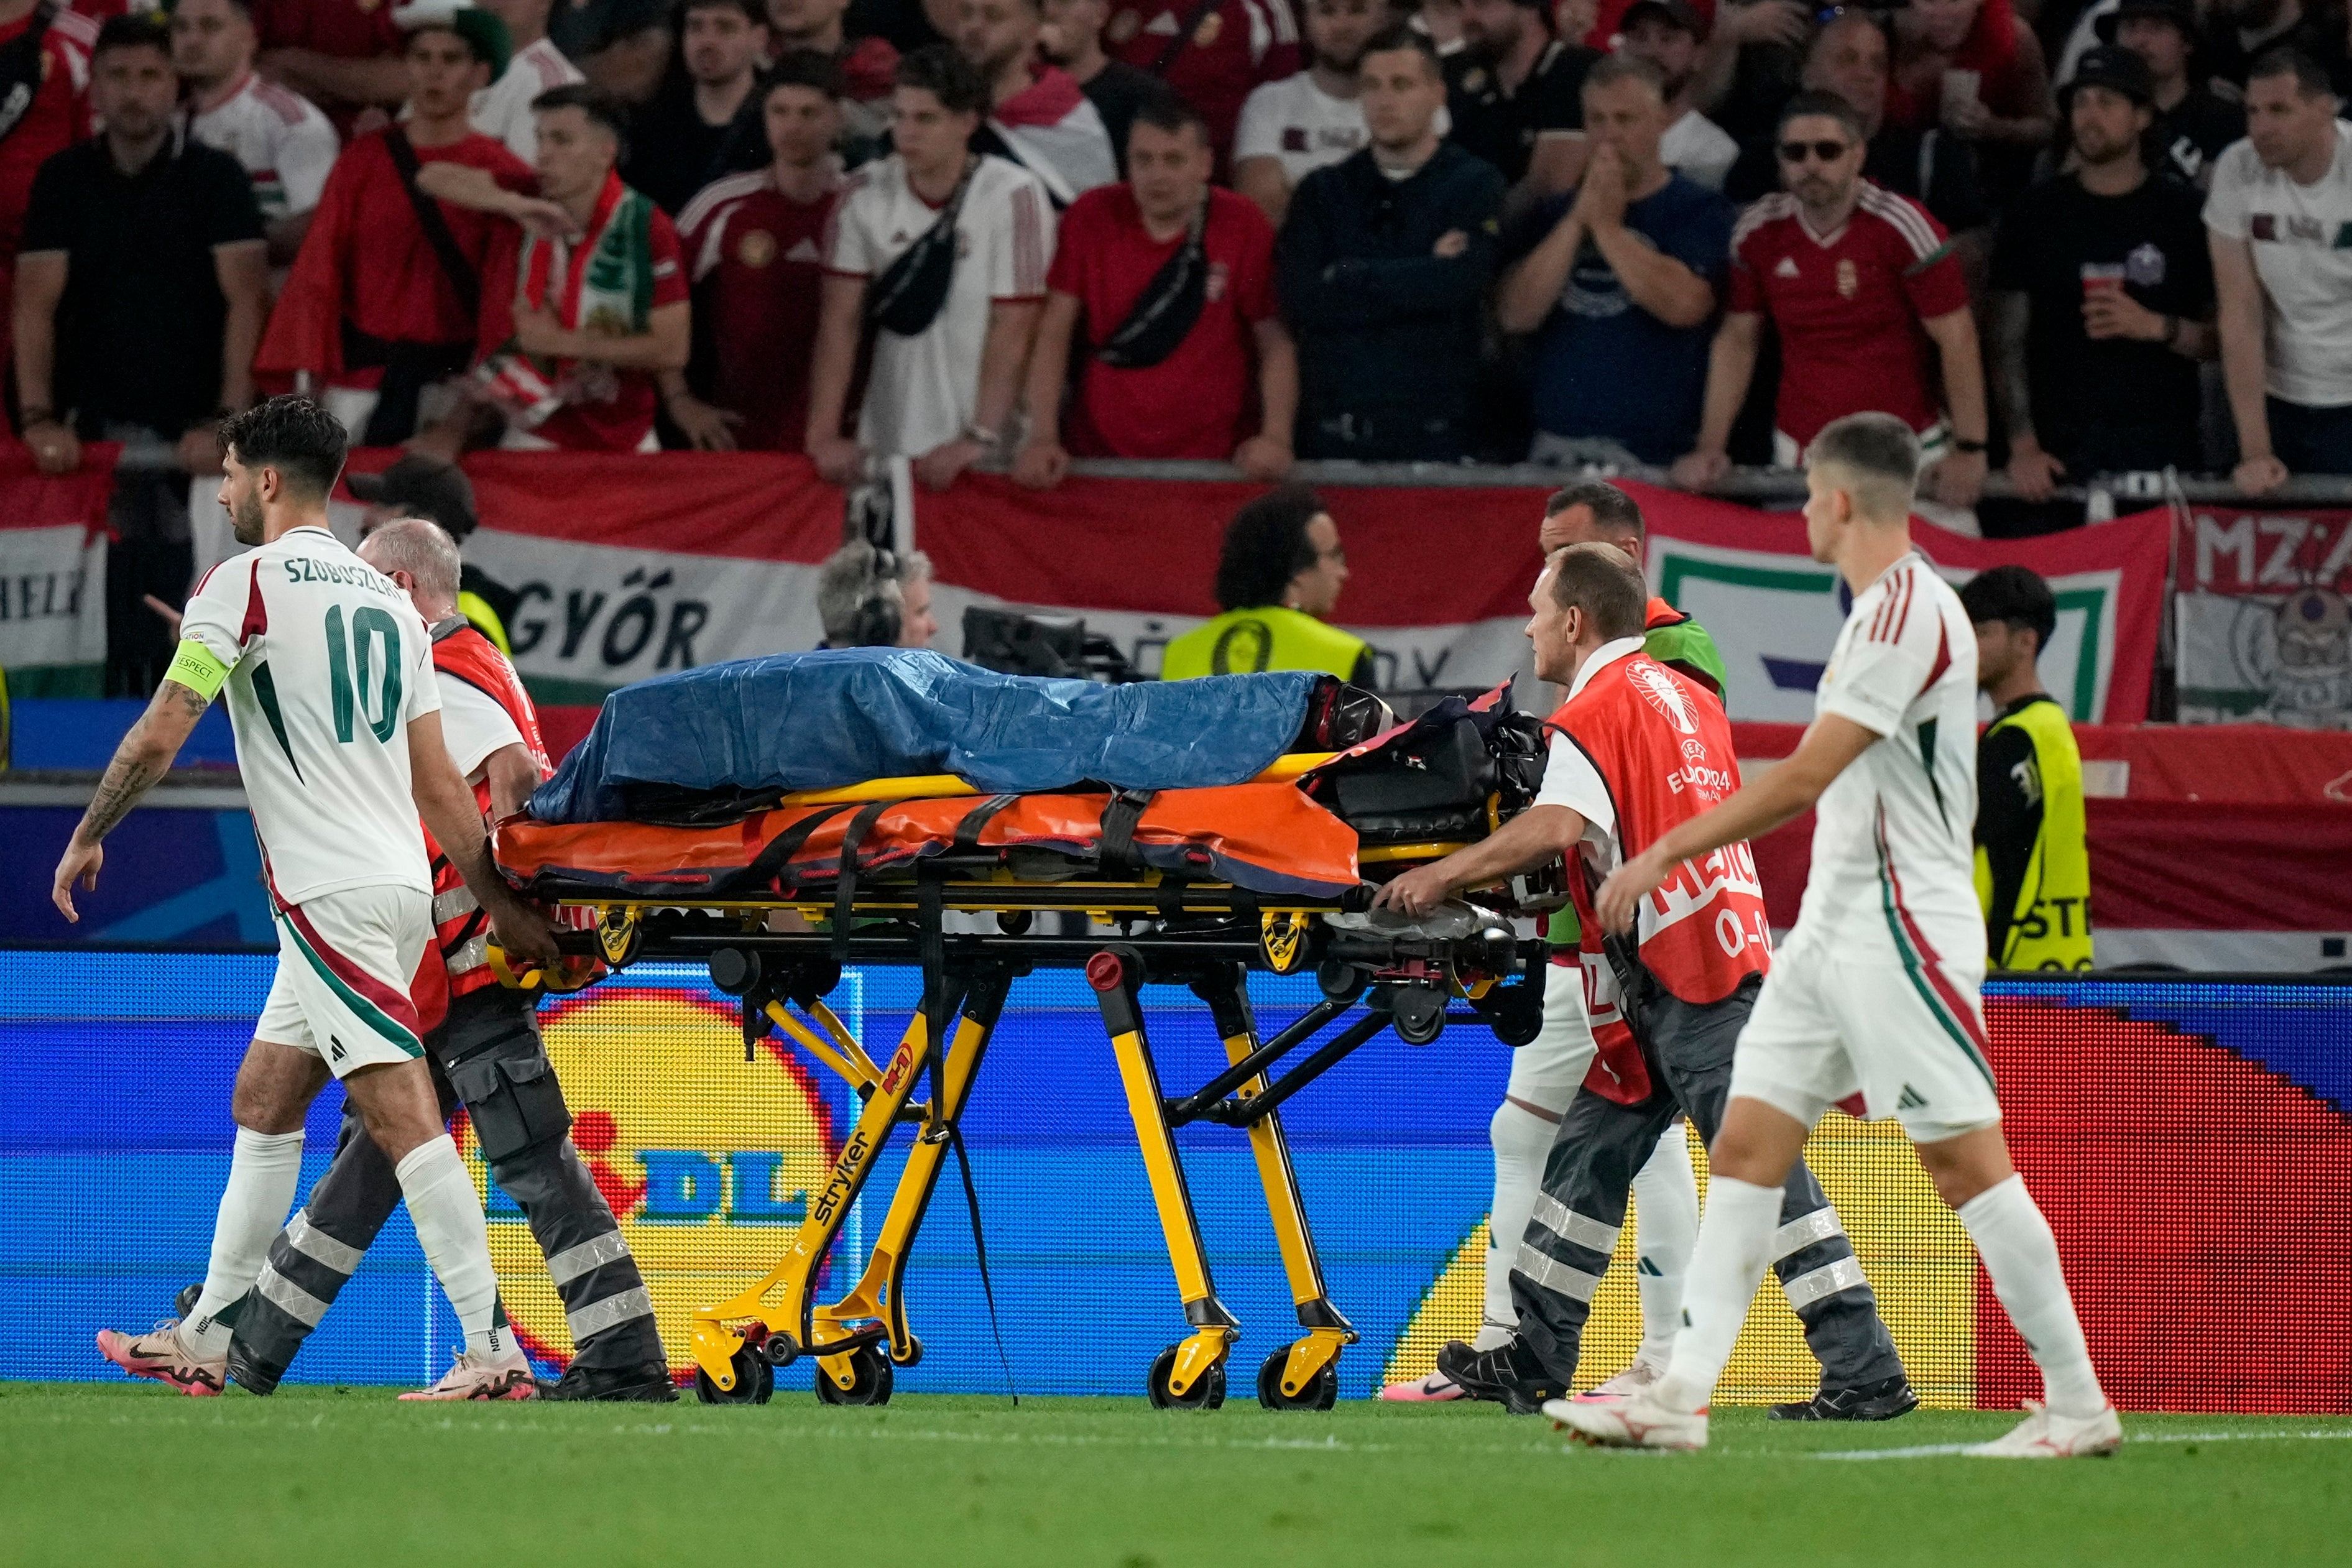 Hungary's Player Varga Who Fell Unconscious Will Not Play In Euro 2024